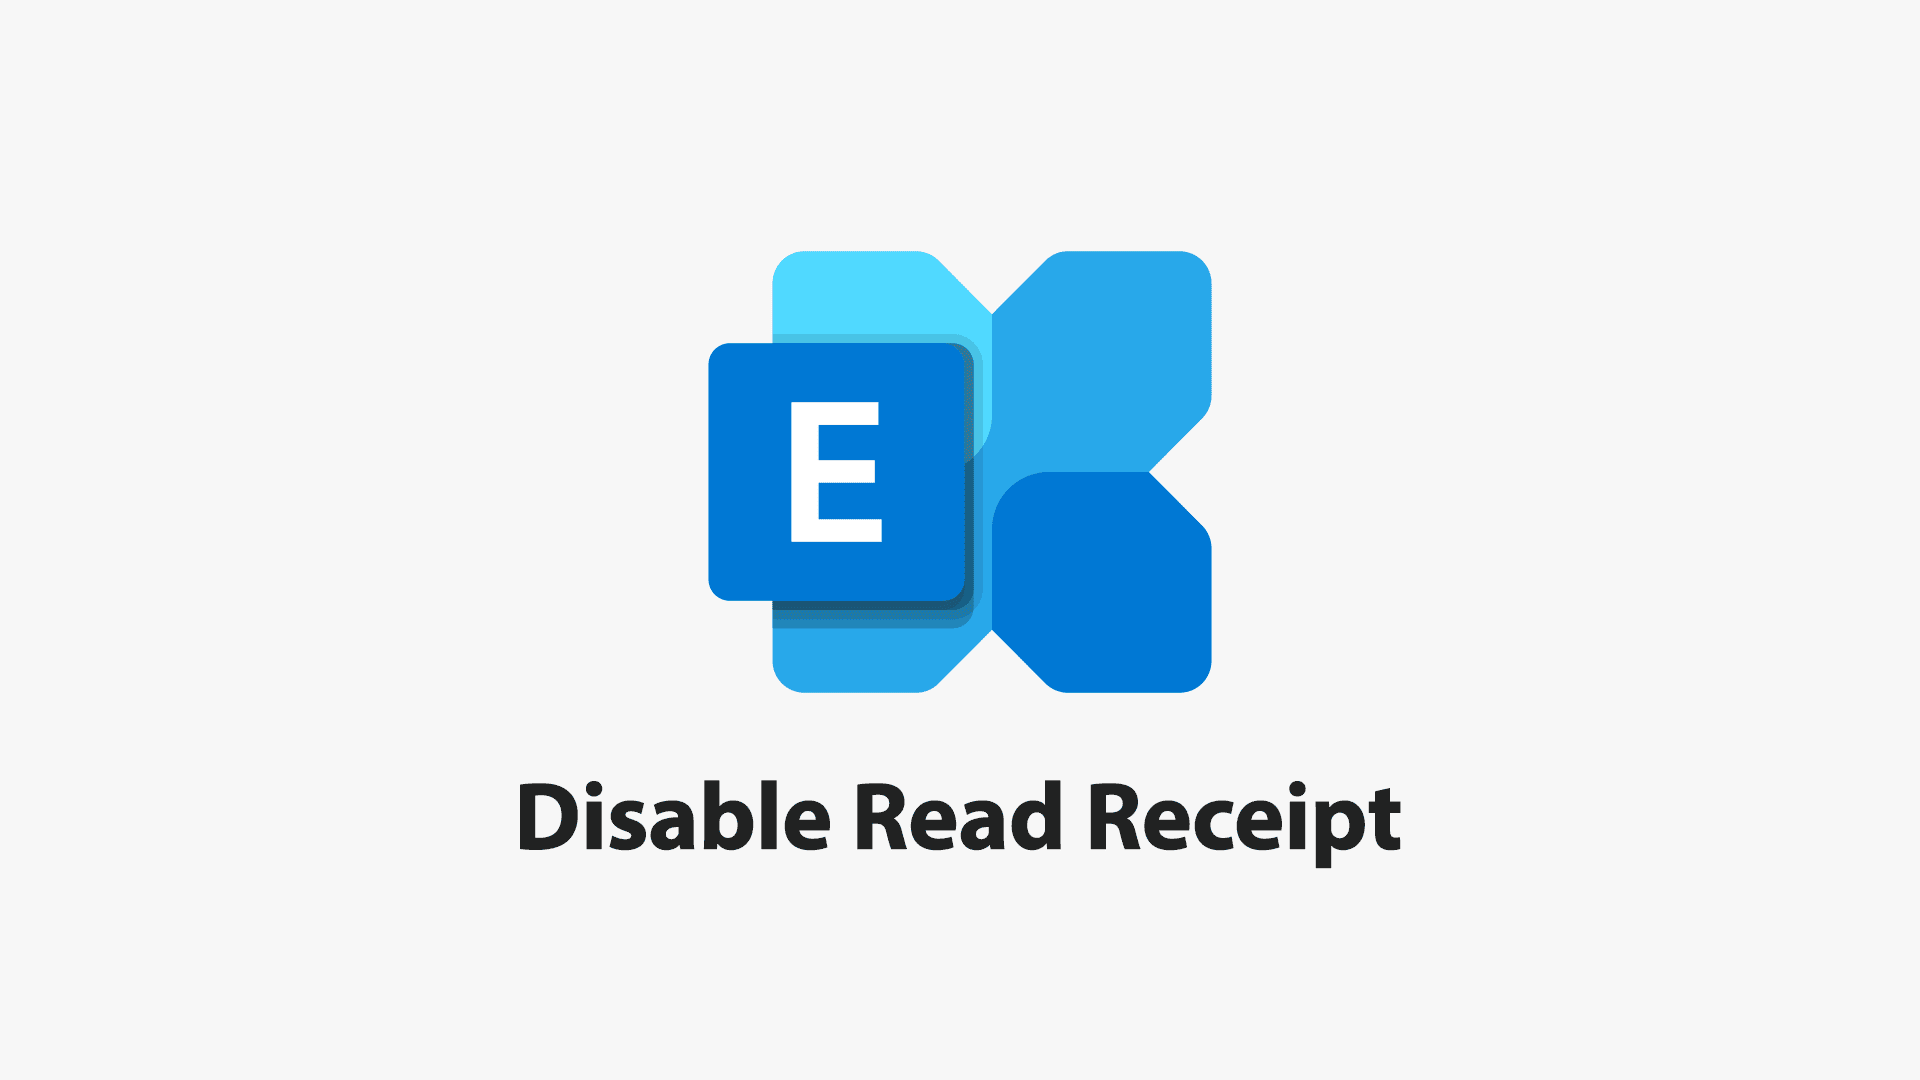 How to disable read receipt requests widely for senders from outside organizations in Microsoft 365